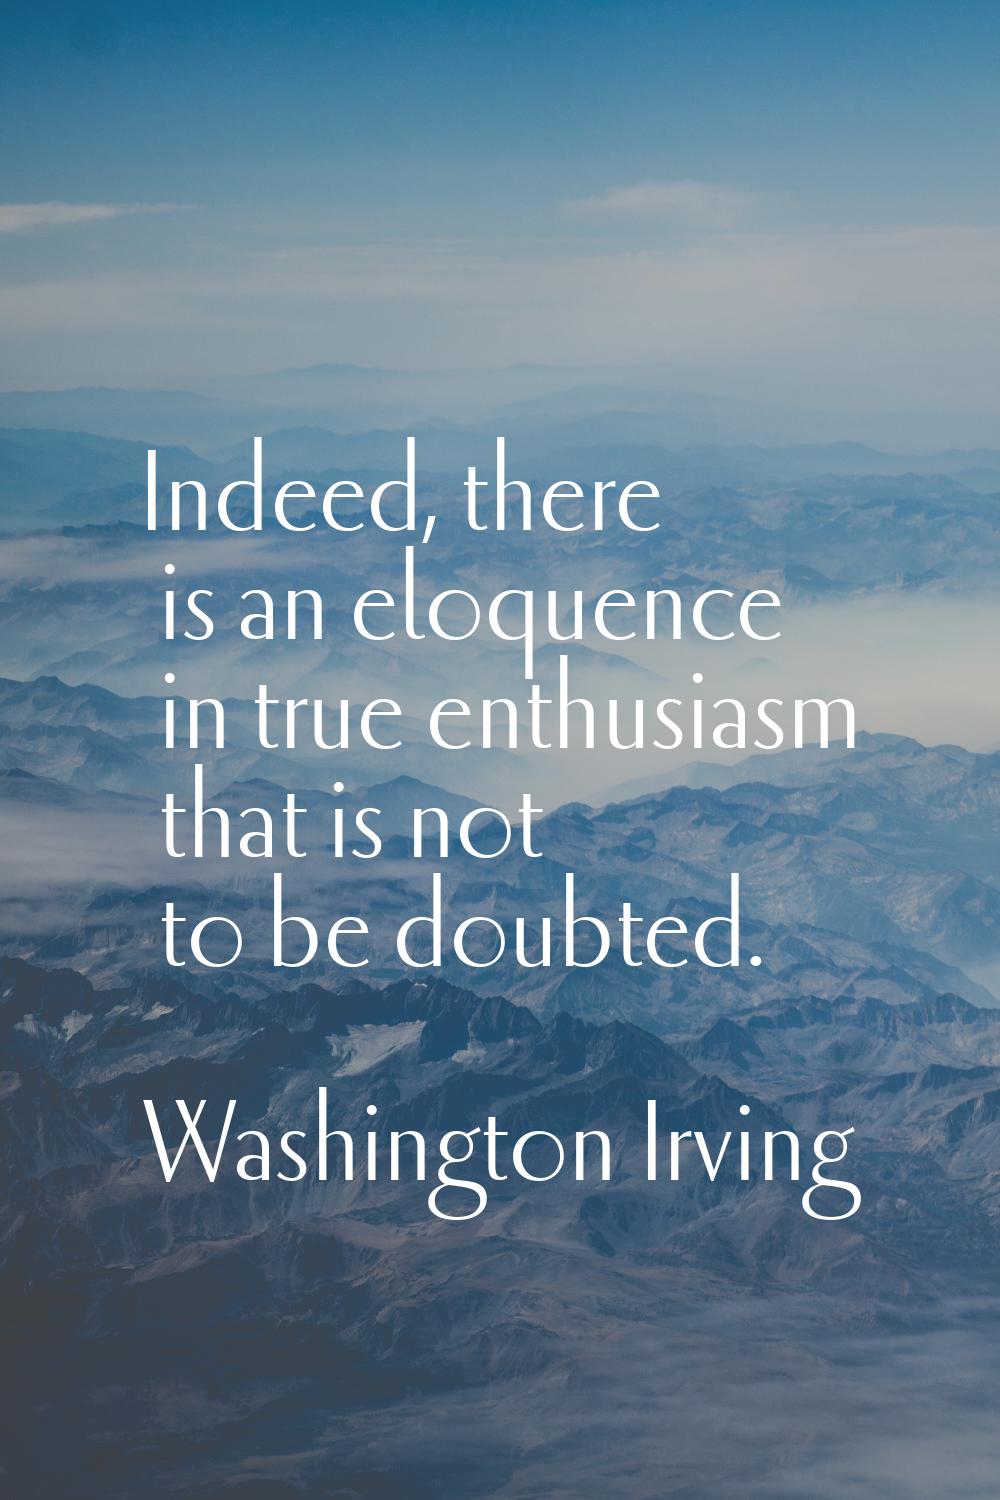 Indeed, there is an eloquence in true enthusiasm that is not to be doubted.